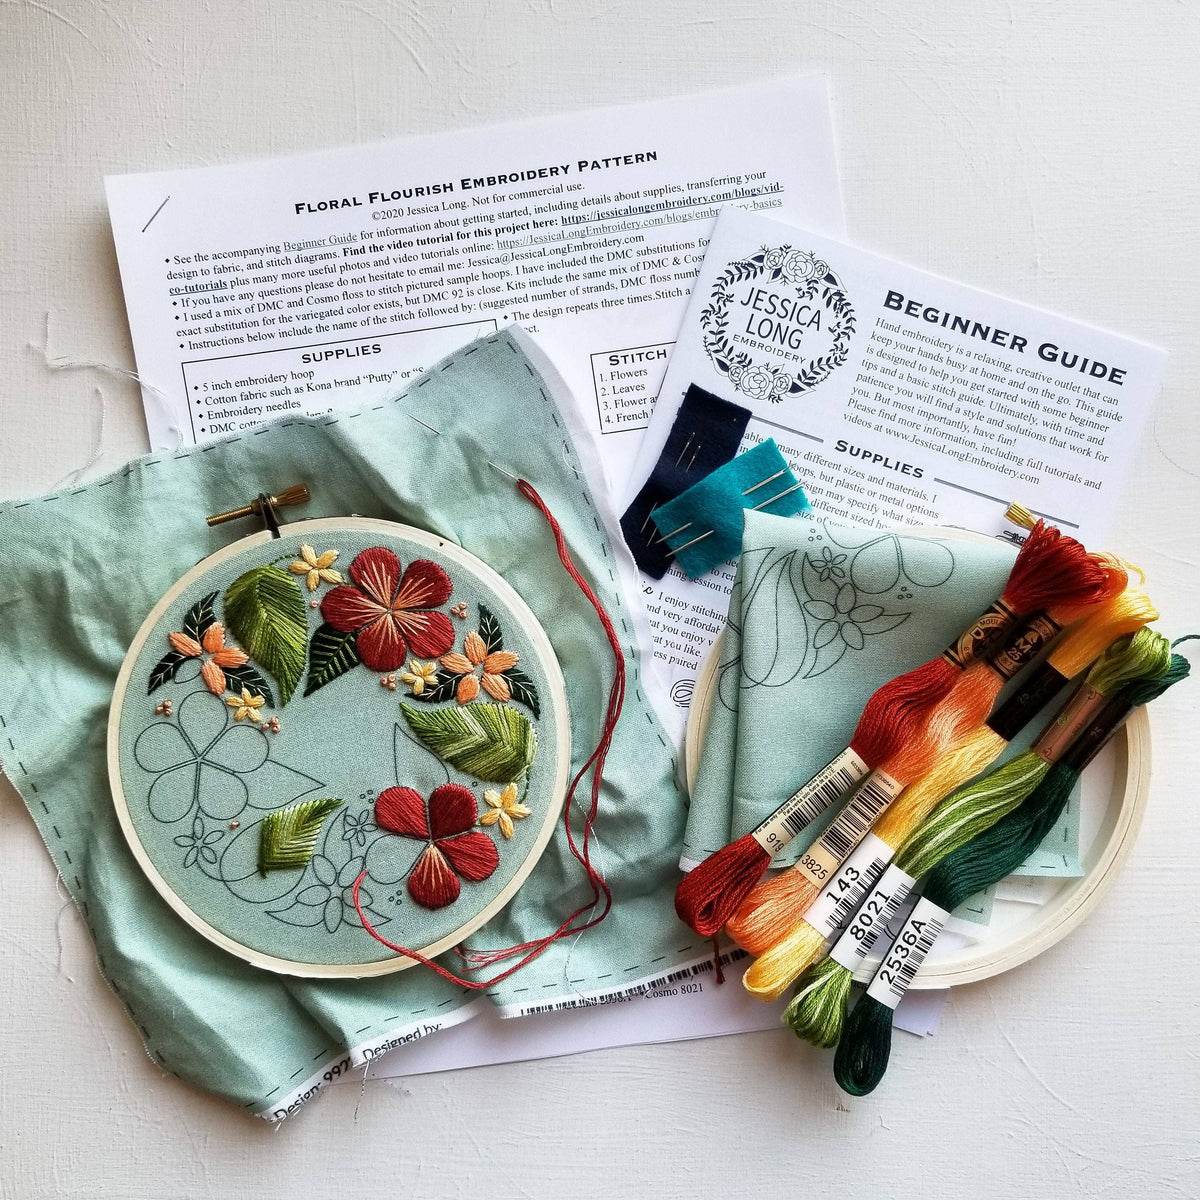 Floral Flourish Hand Embroidery Kit